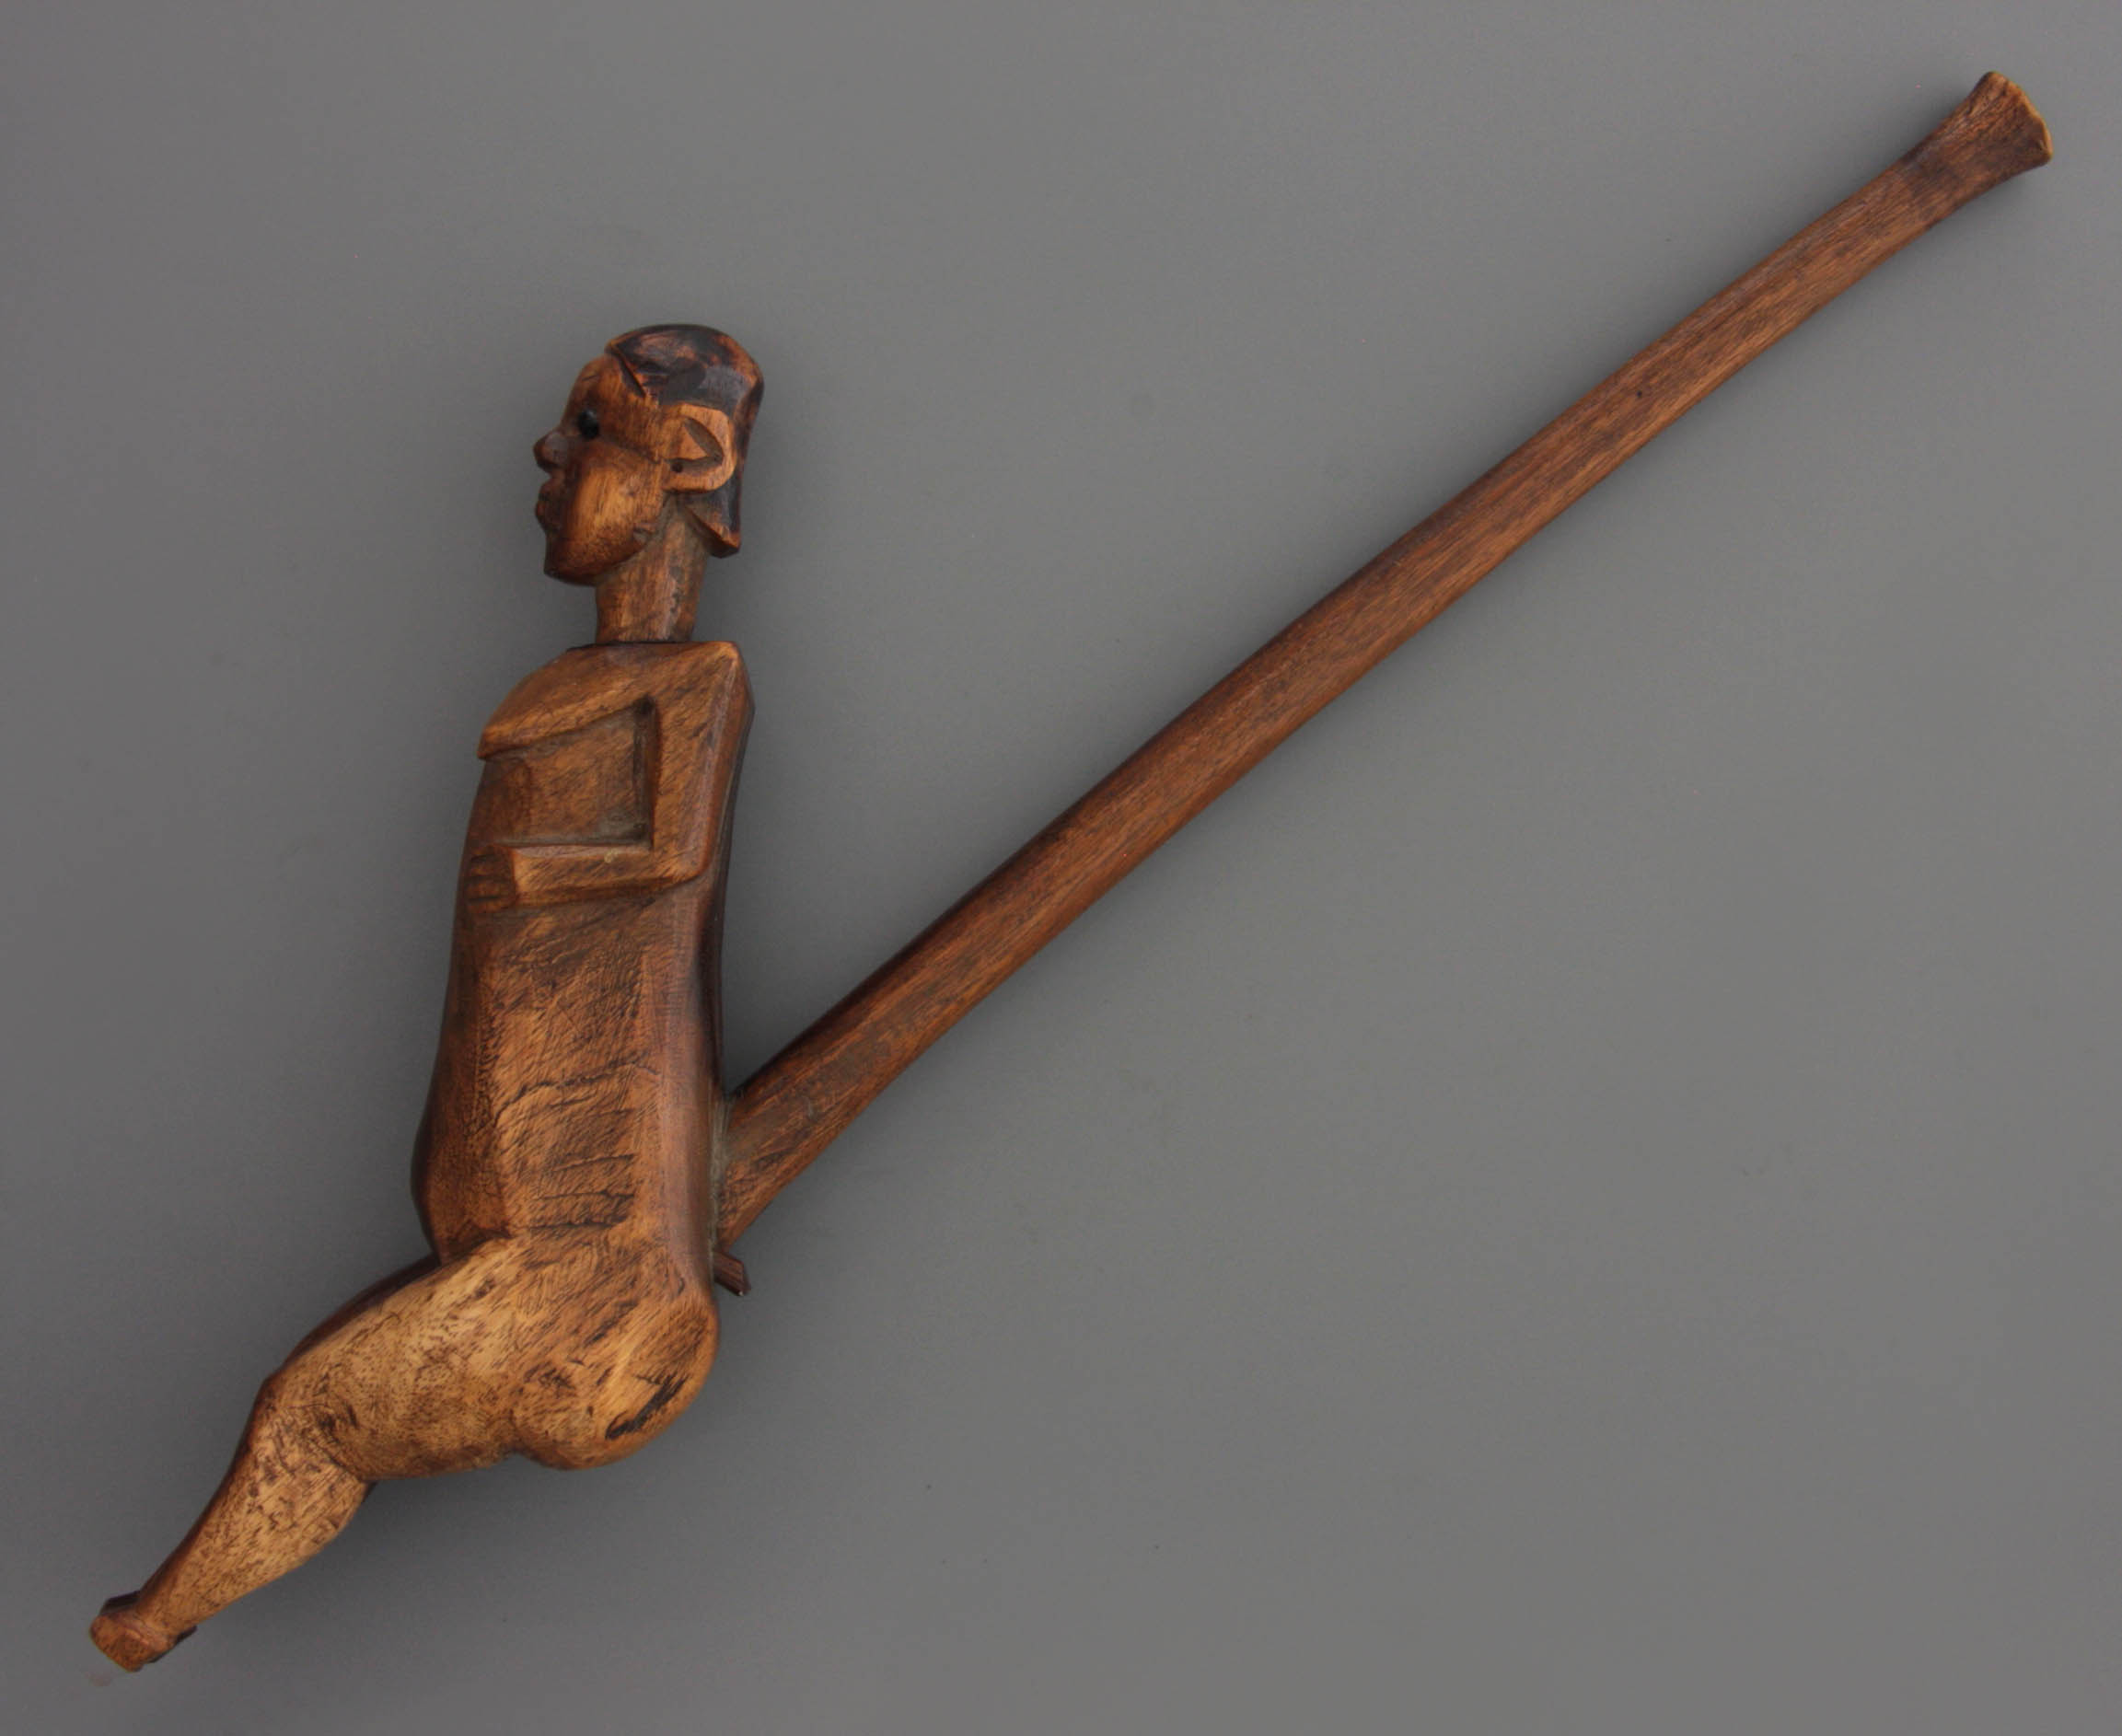 13-18.716-south-africa-xhosa-figural-tobacco-pipe-01